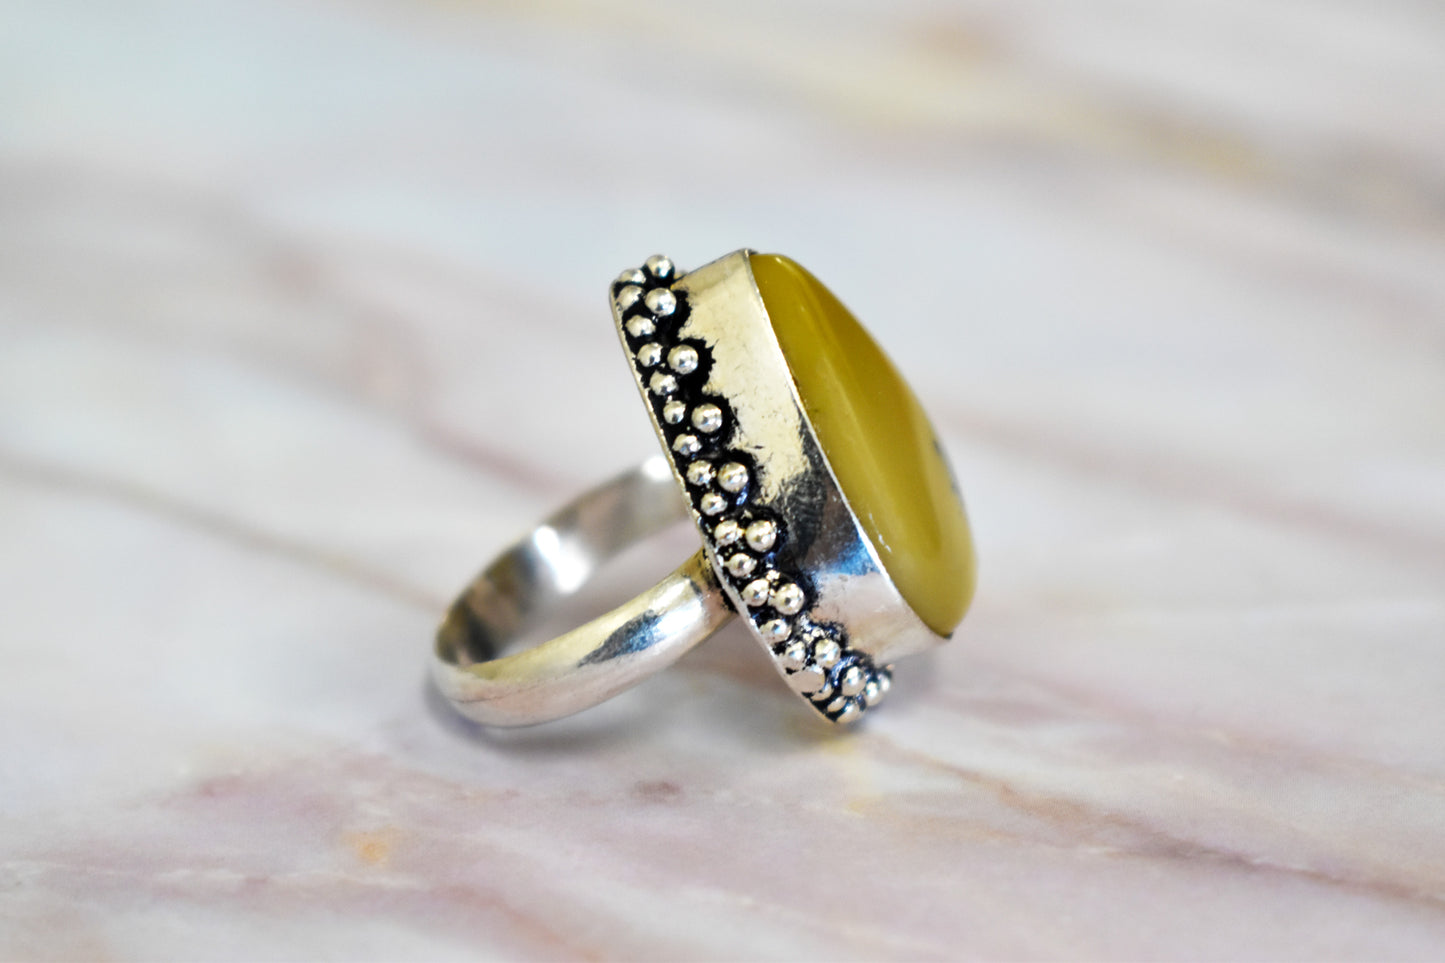 Yellow Dendritic Agate Ring (Size 8)